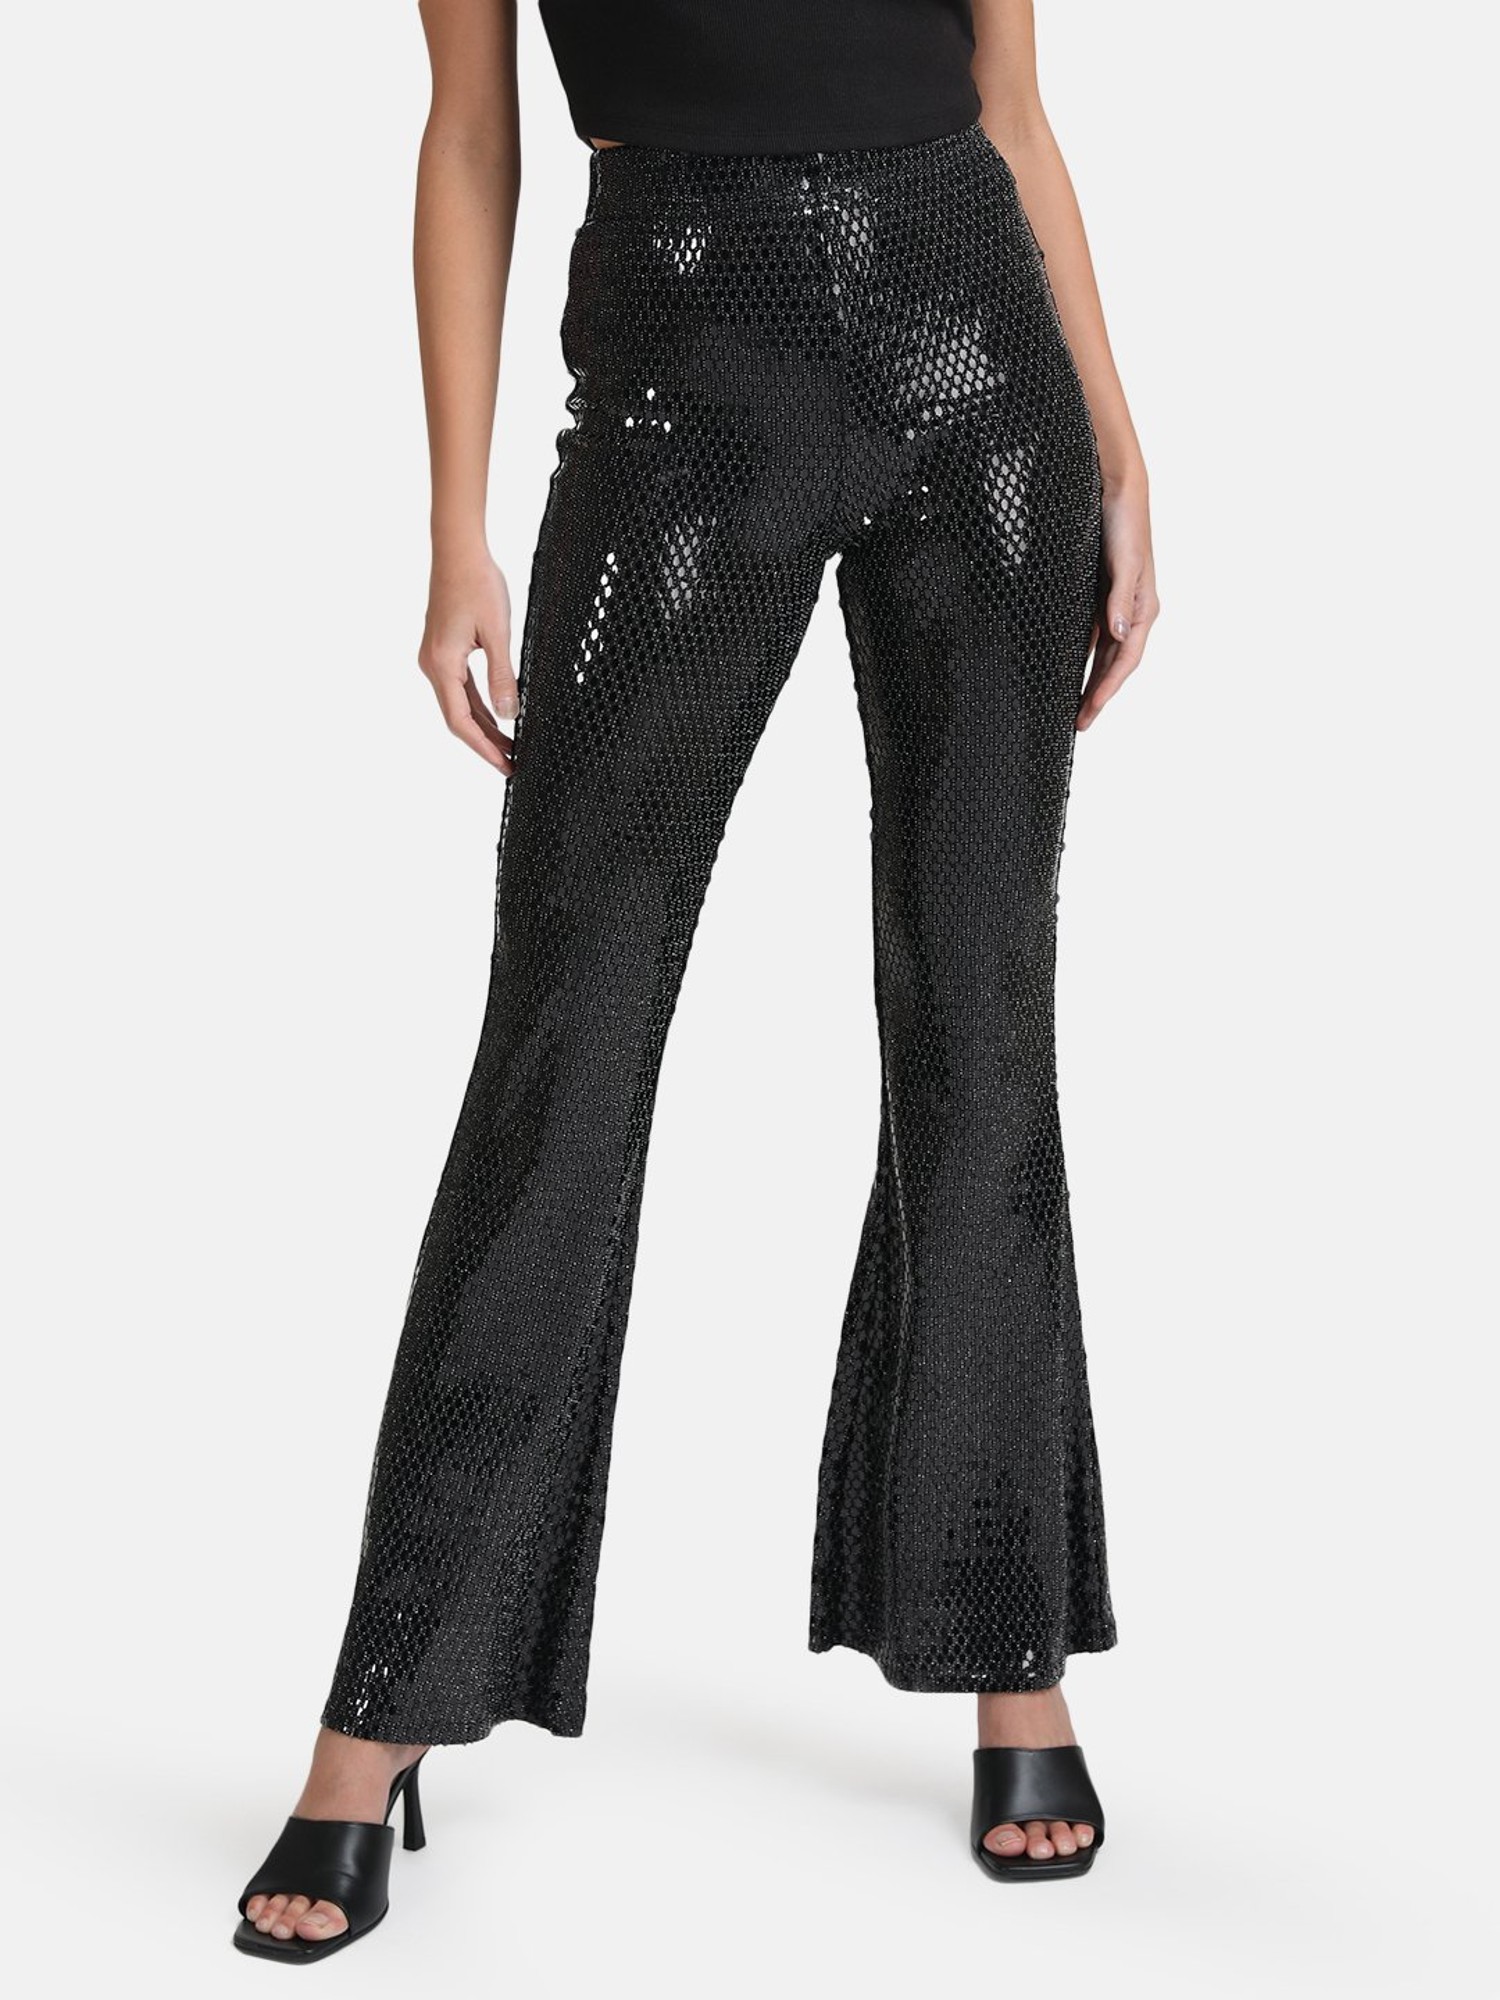 Glamorous high waisted flare pants in matte black sequin part of a set   ASOS